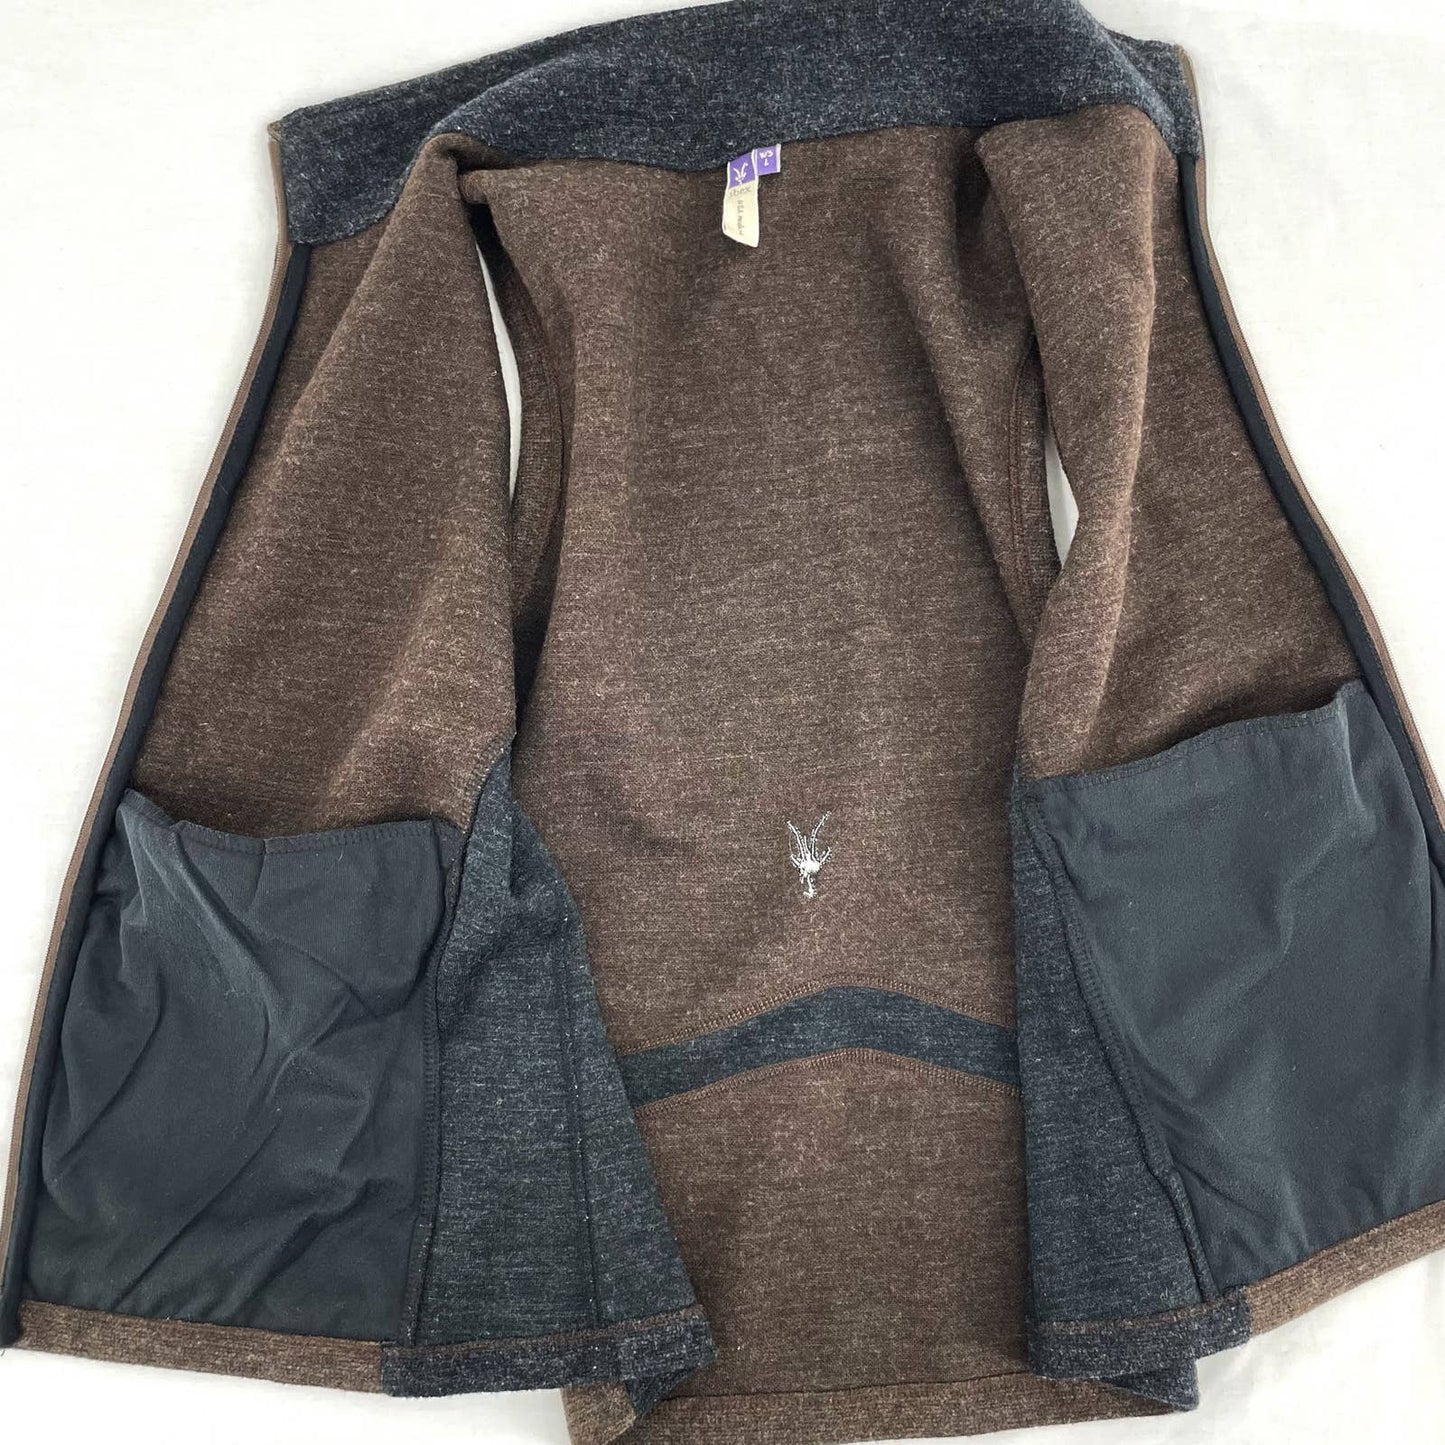 Ibex Merino Wool Full Zip Vest Brown Taupe Black Gray Pockets Outdoor Fit Size L